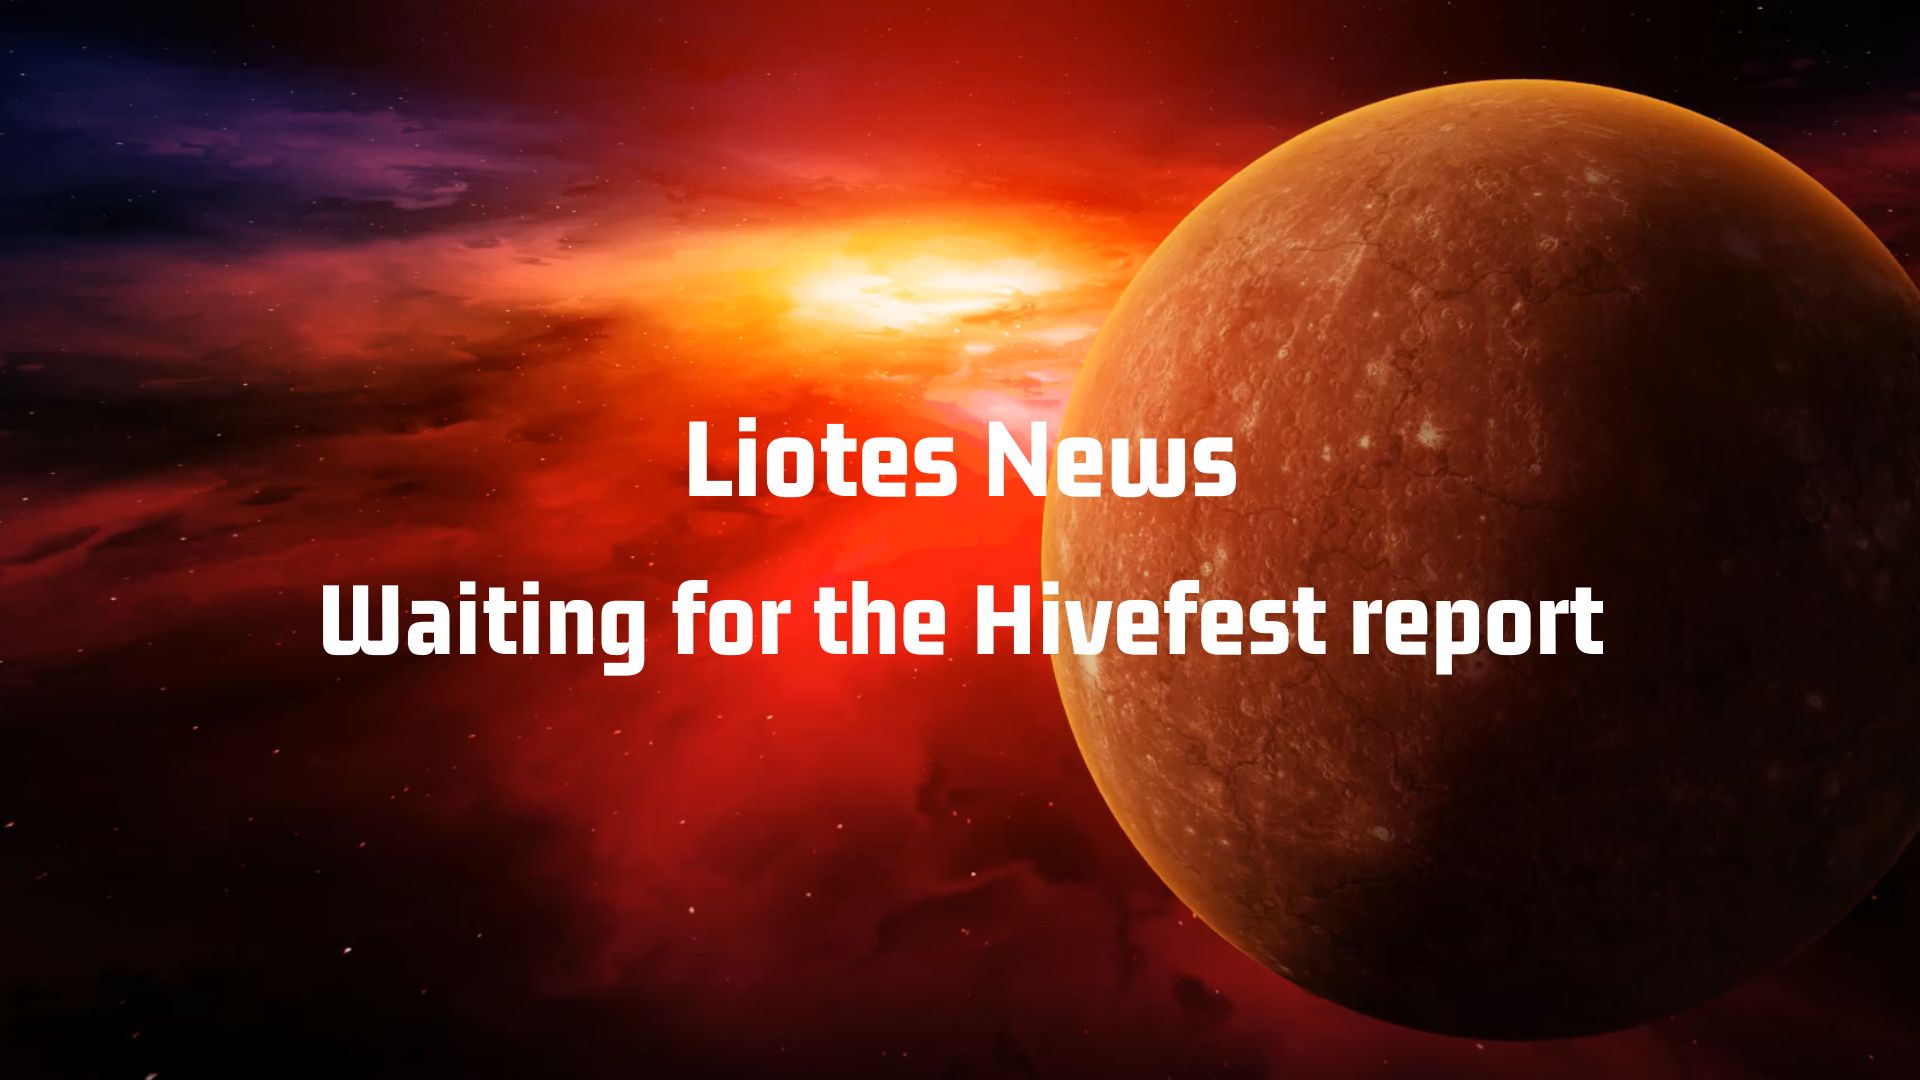 @liotes/waiting-for-the-hivefest-report